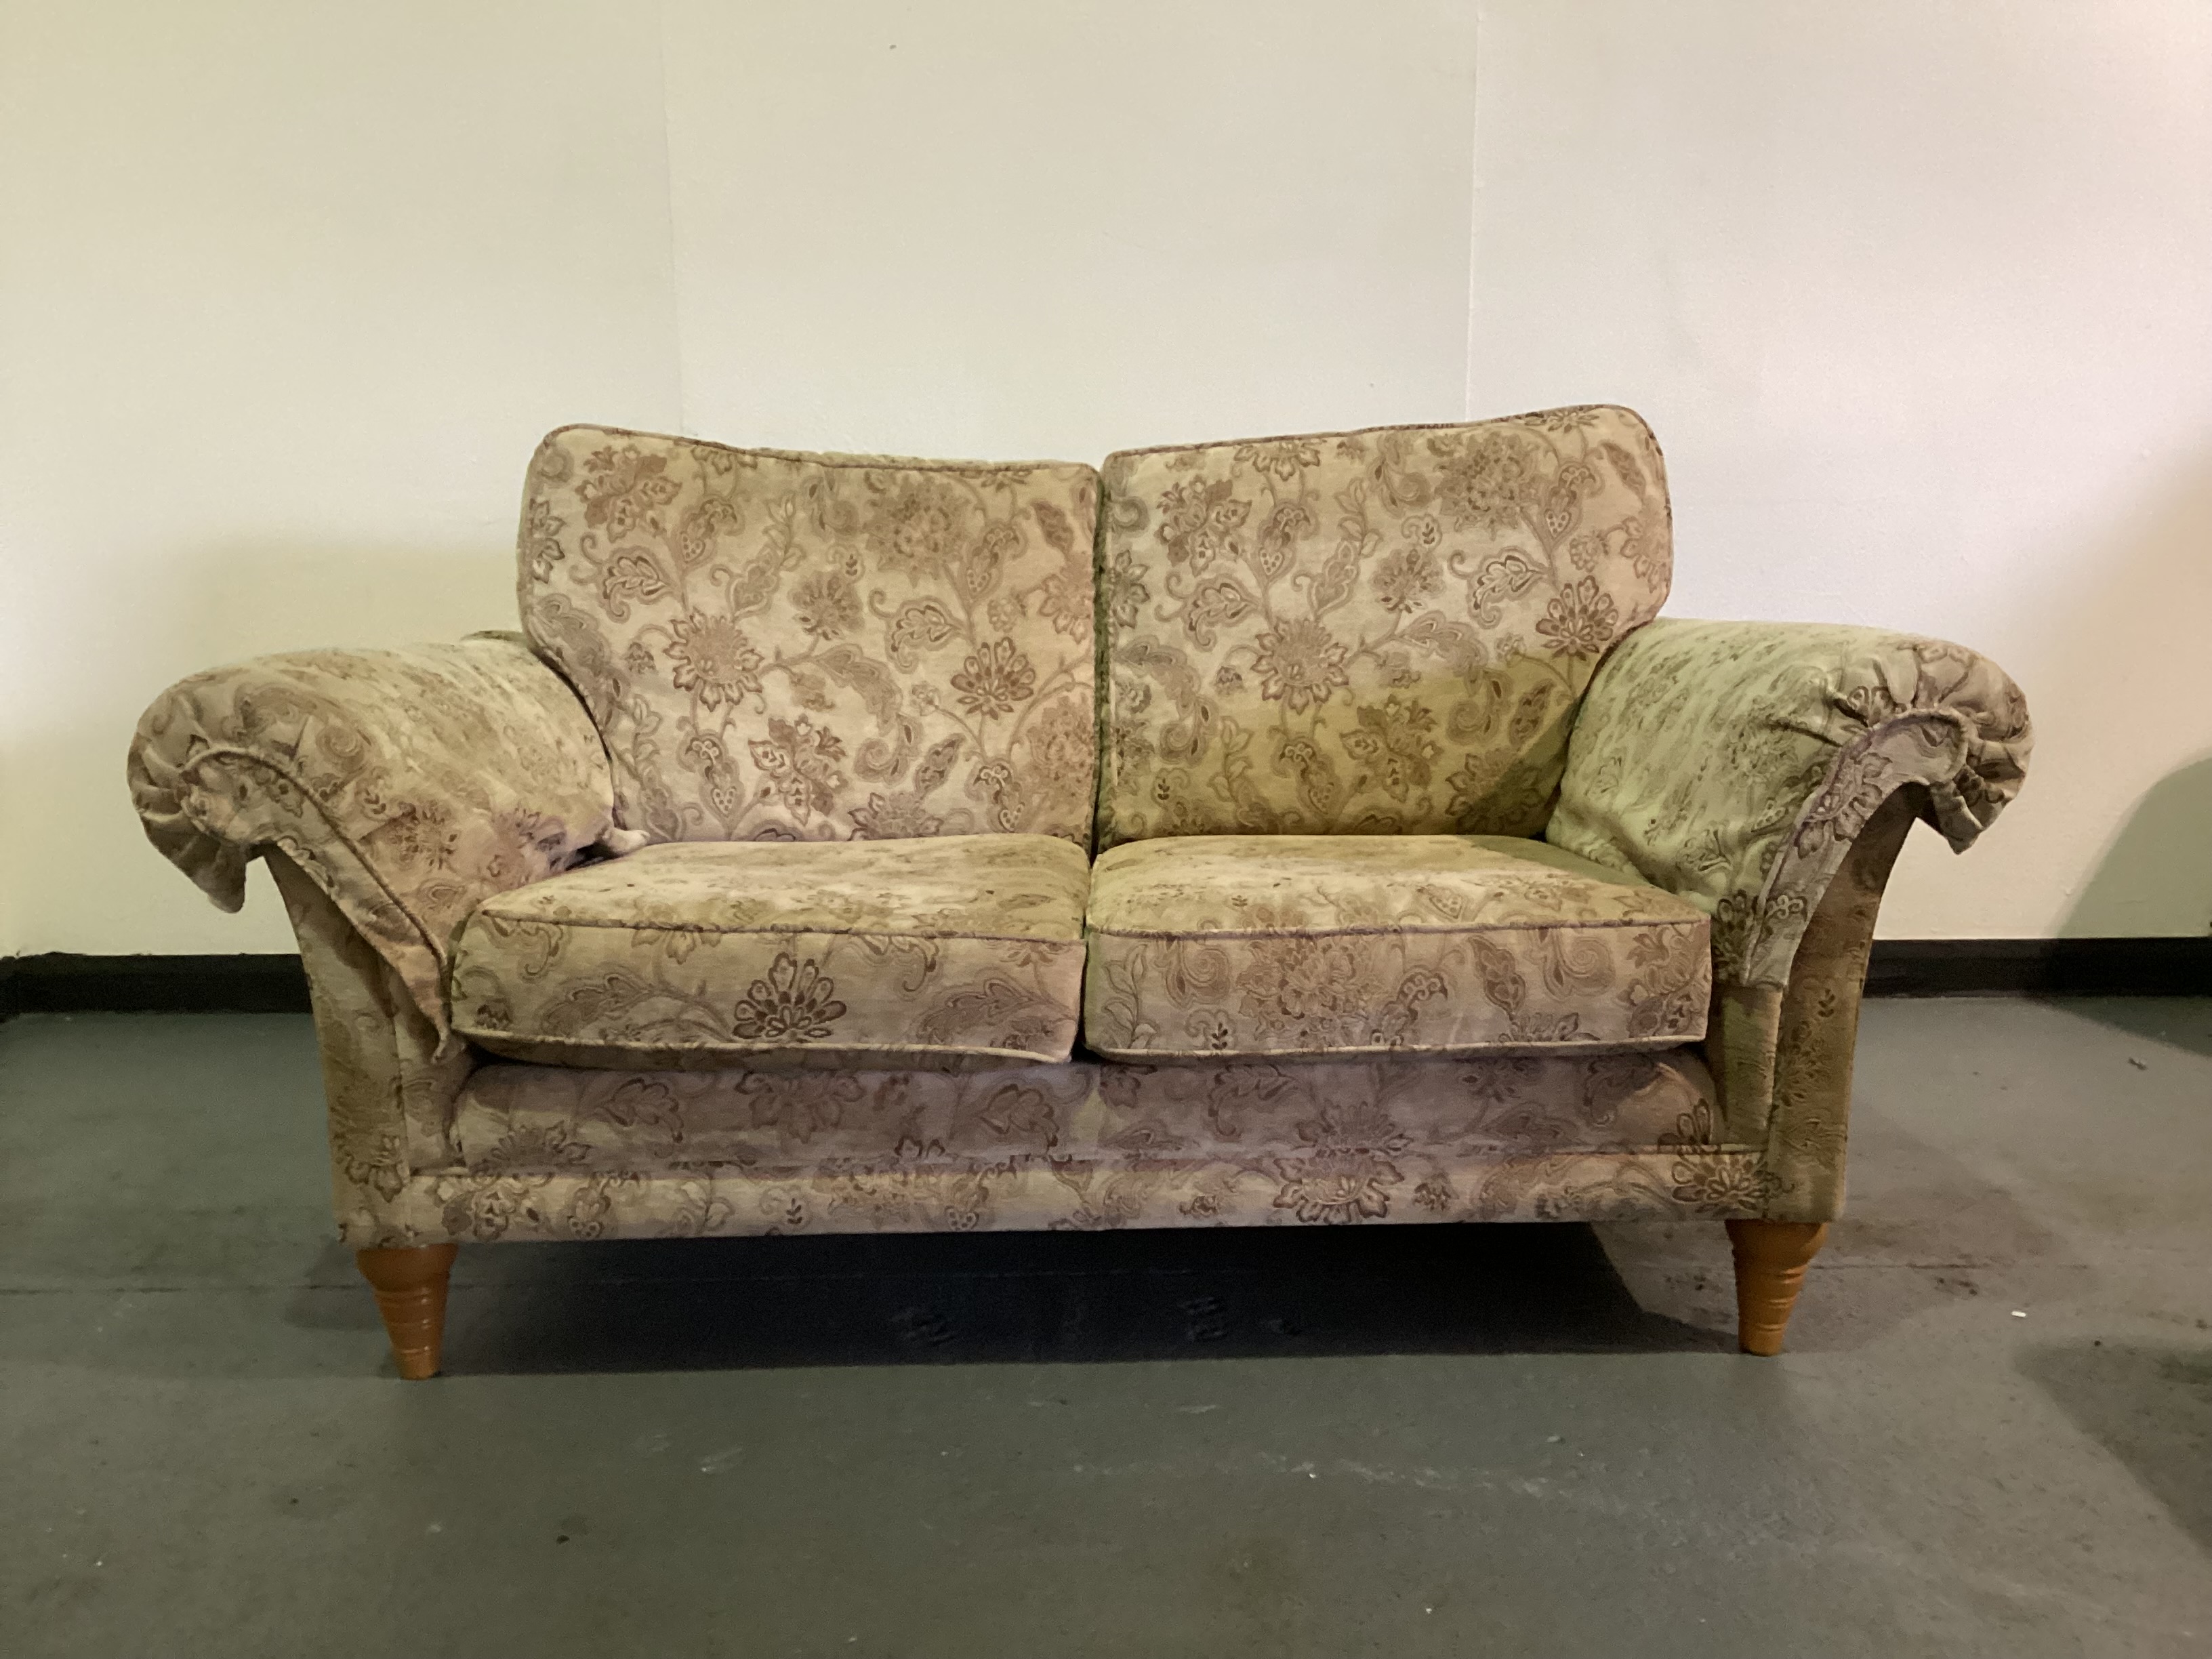 2 Seater Parker Knoll Sofa